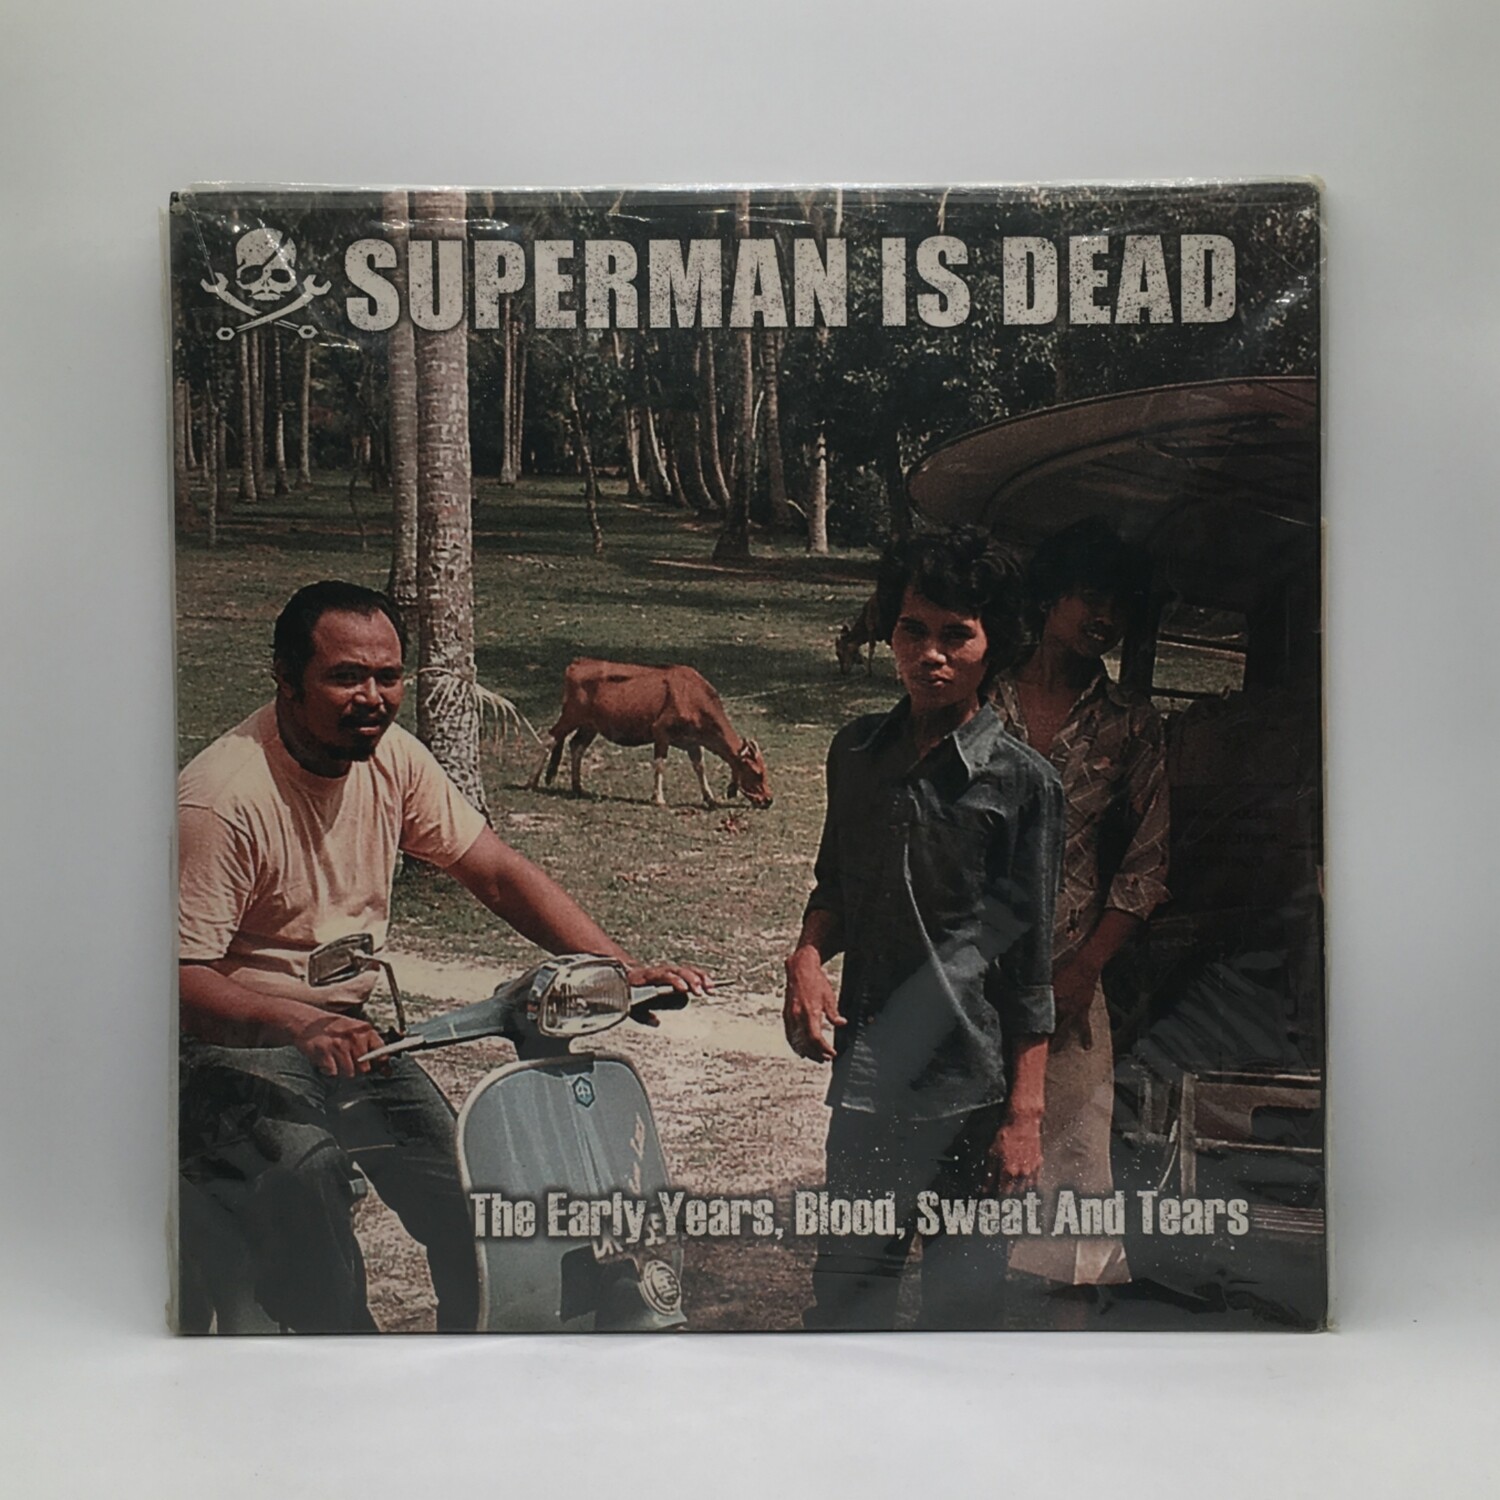 [USED] SUPERMAN IS DEAD -THE EARLY YEARS, BLOOD SWEET AND TEARS- LP